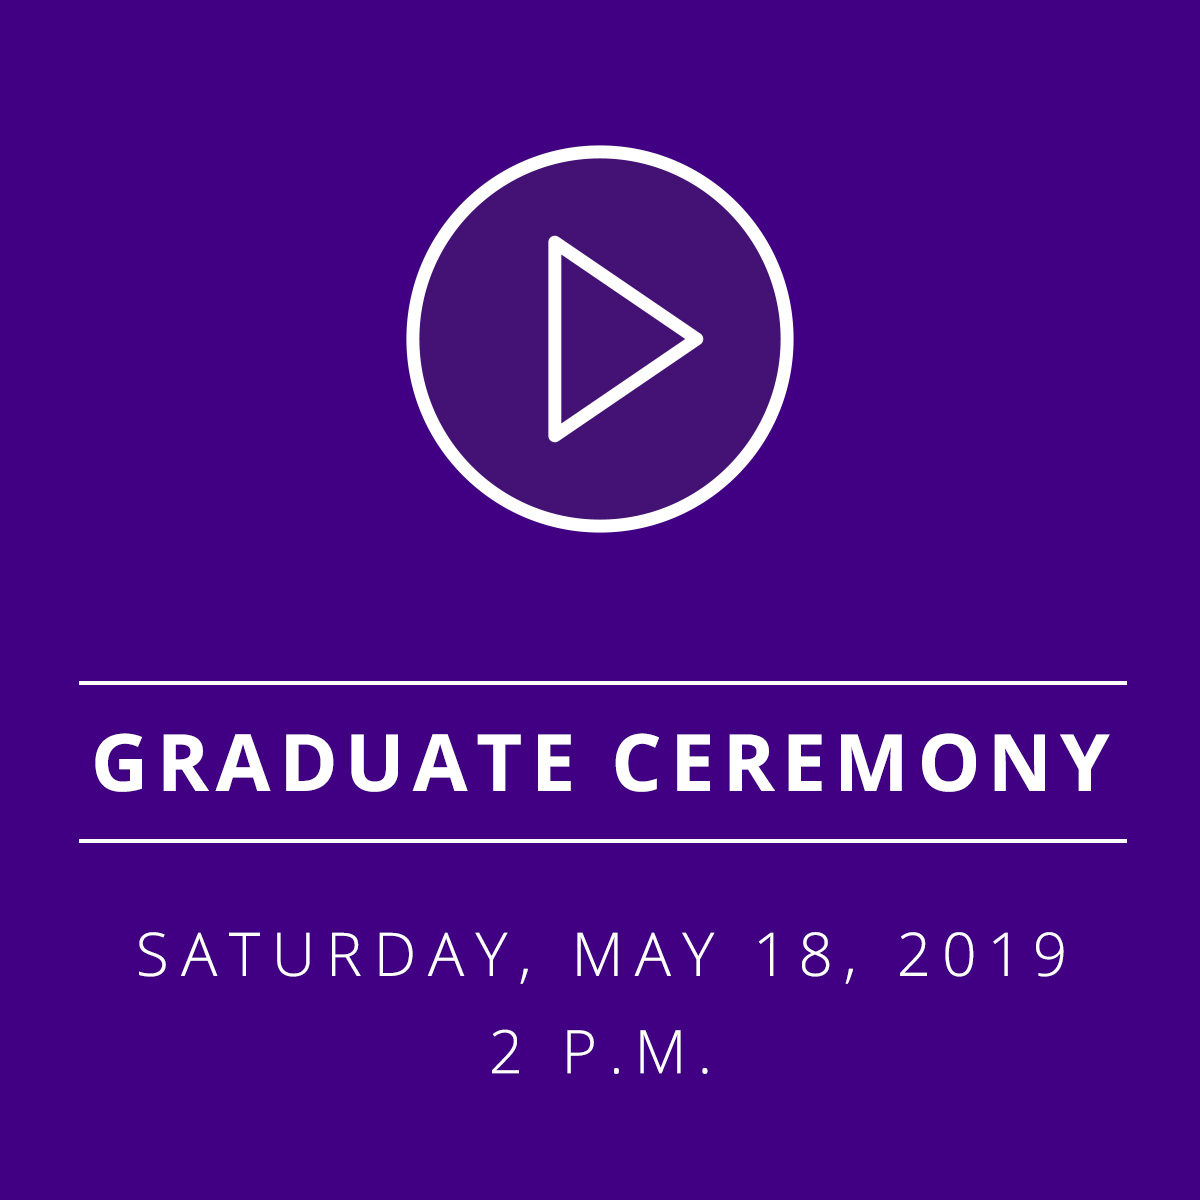 Graduate Commencement Ceremony - Saturday, May 18, 2019 - 2 p.m.